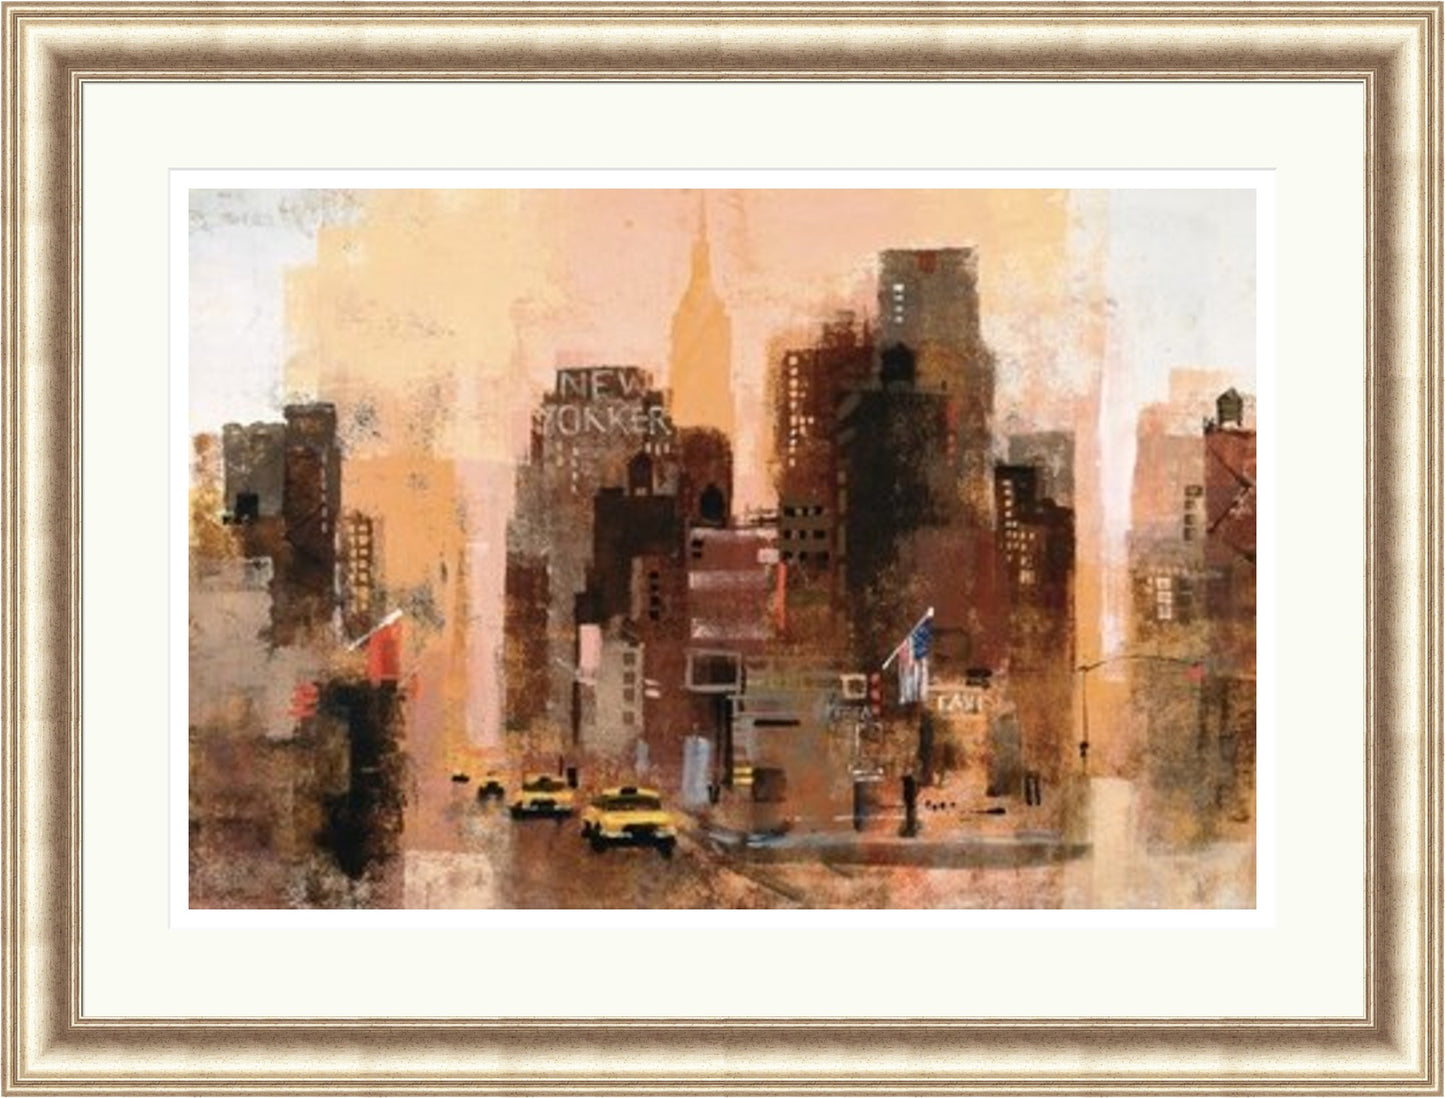 New Yorker and Cabs by Colin Ruffell